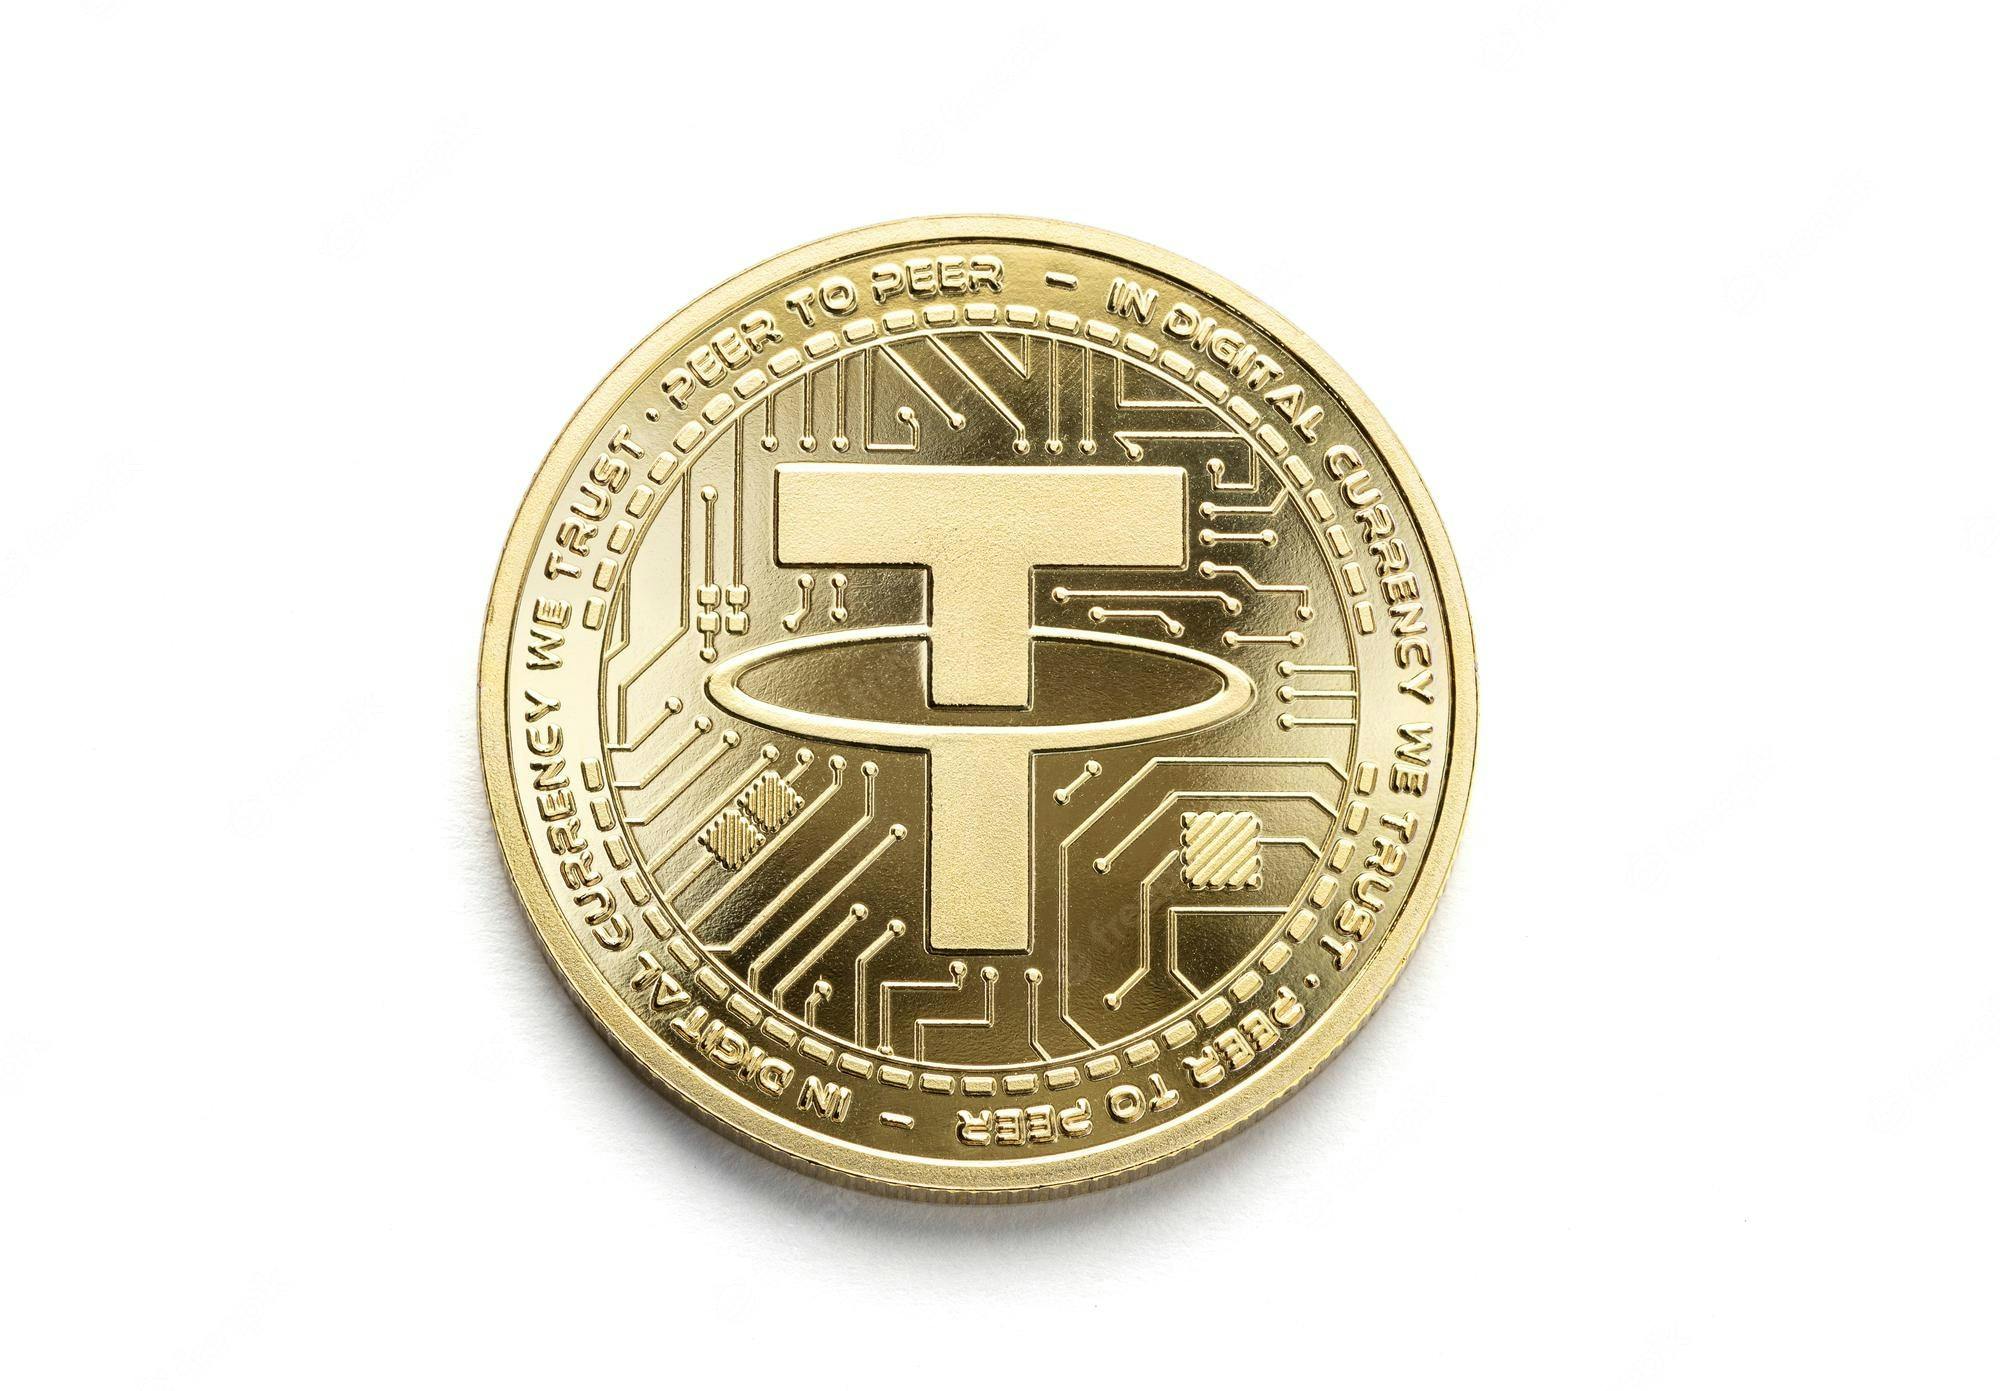 usdt-coin-isolated-white-background-tether-cryptocurrency_136875-3473.jpg